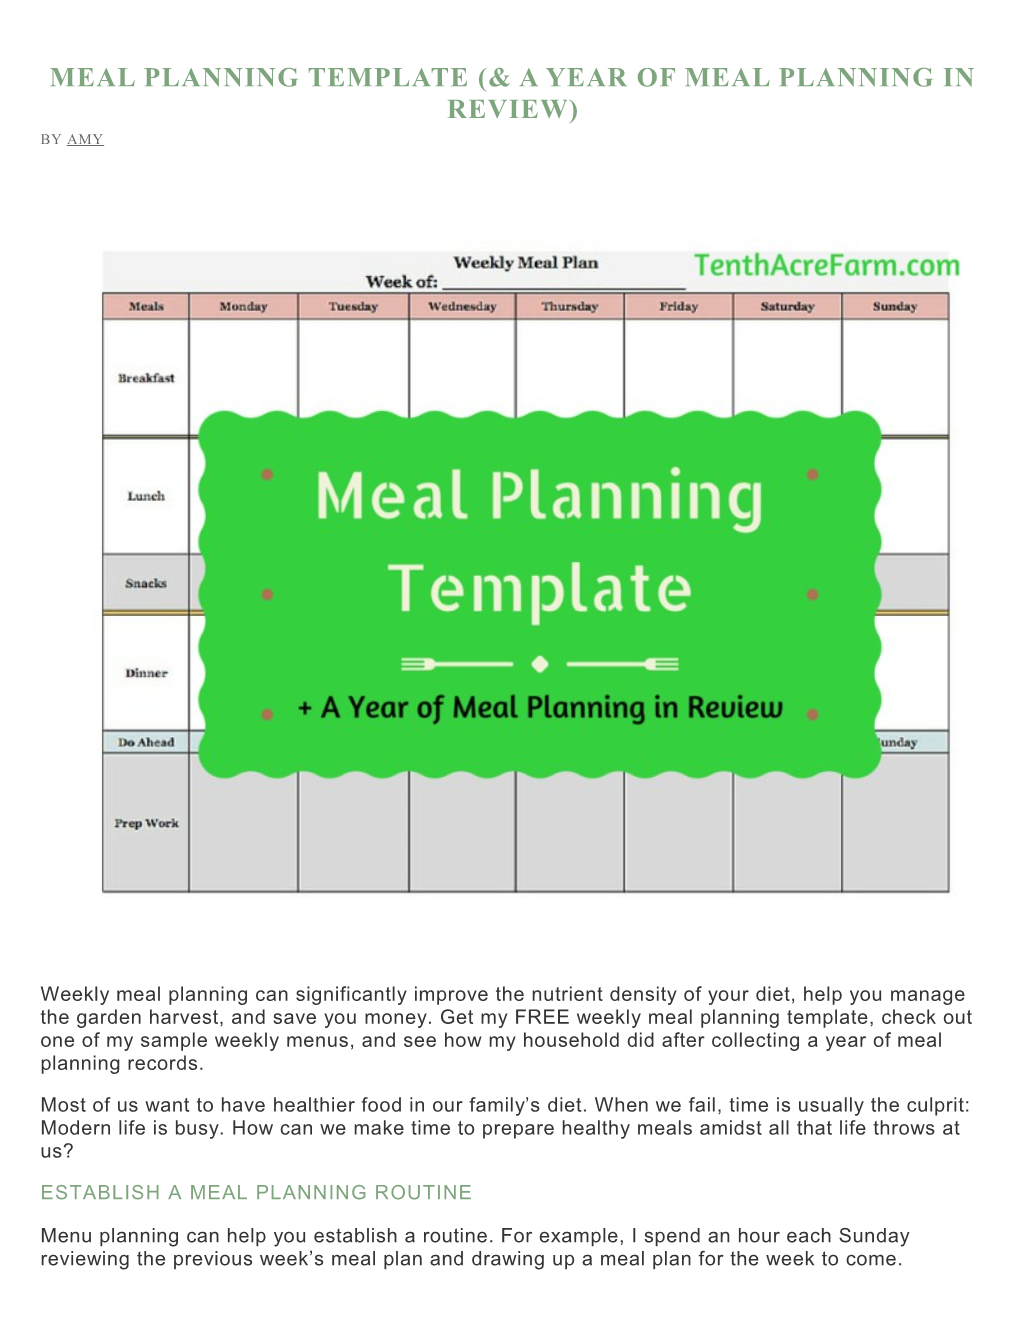 Meal Planning Template (& a Year of Meal Planning in Review)